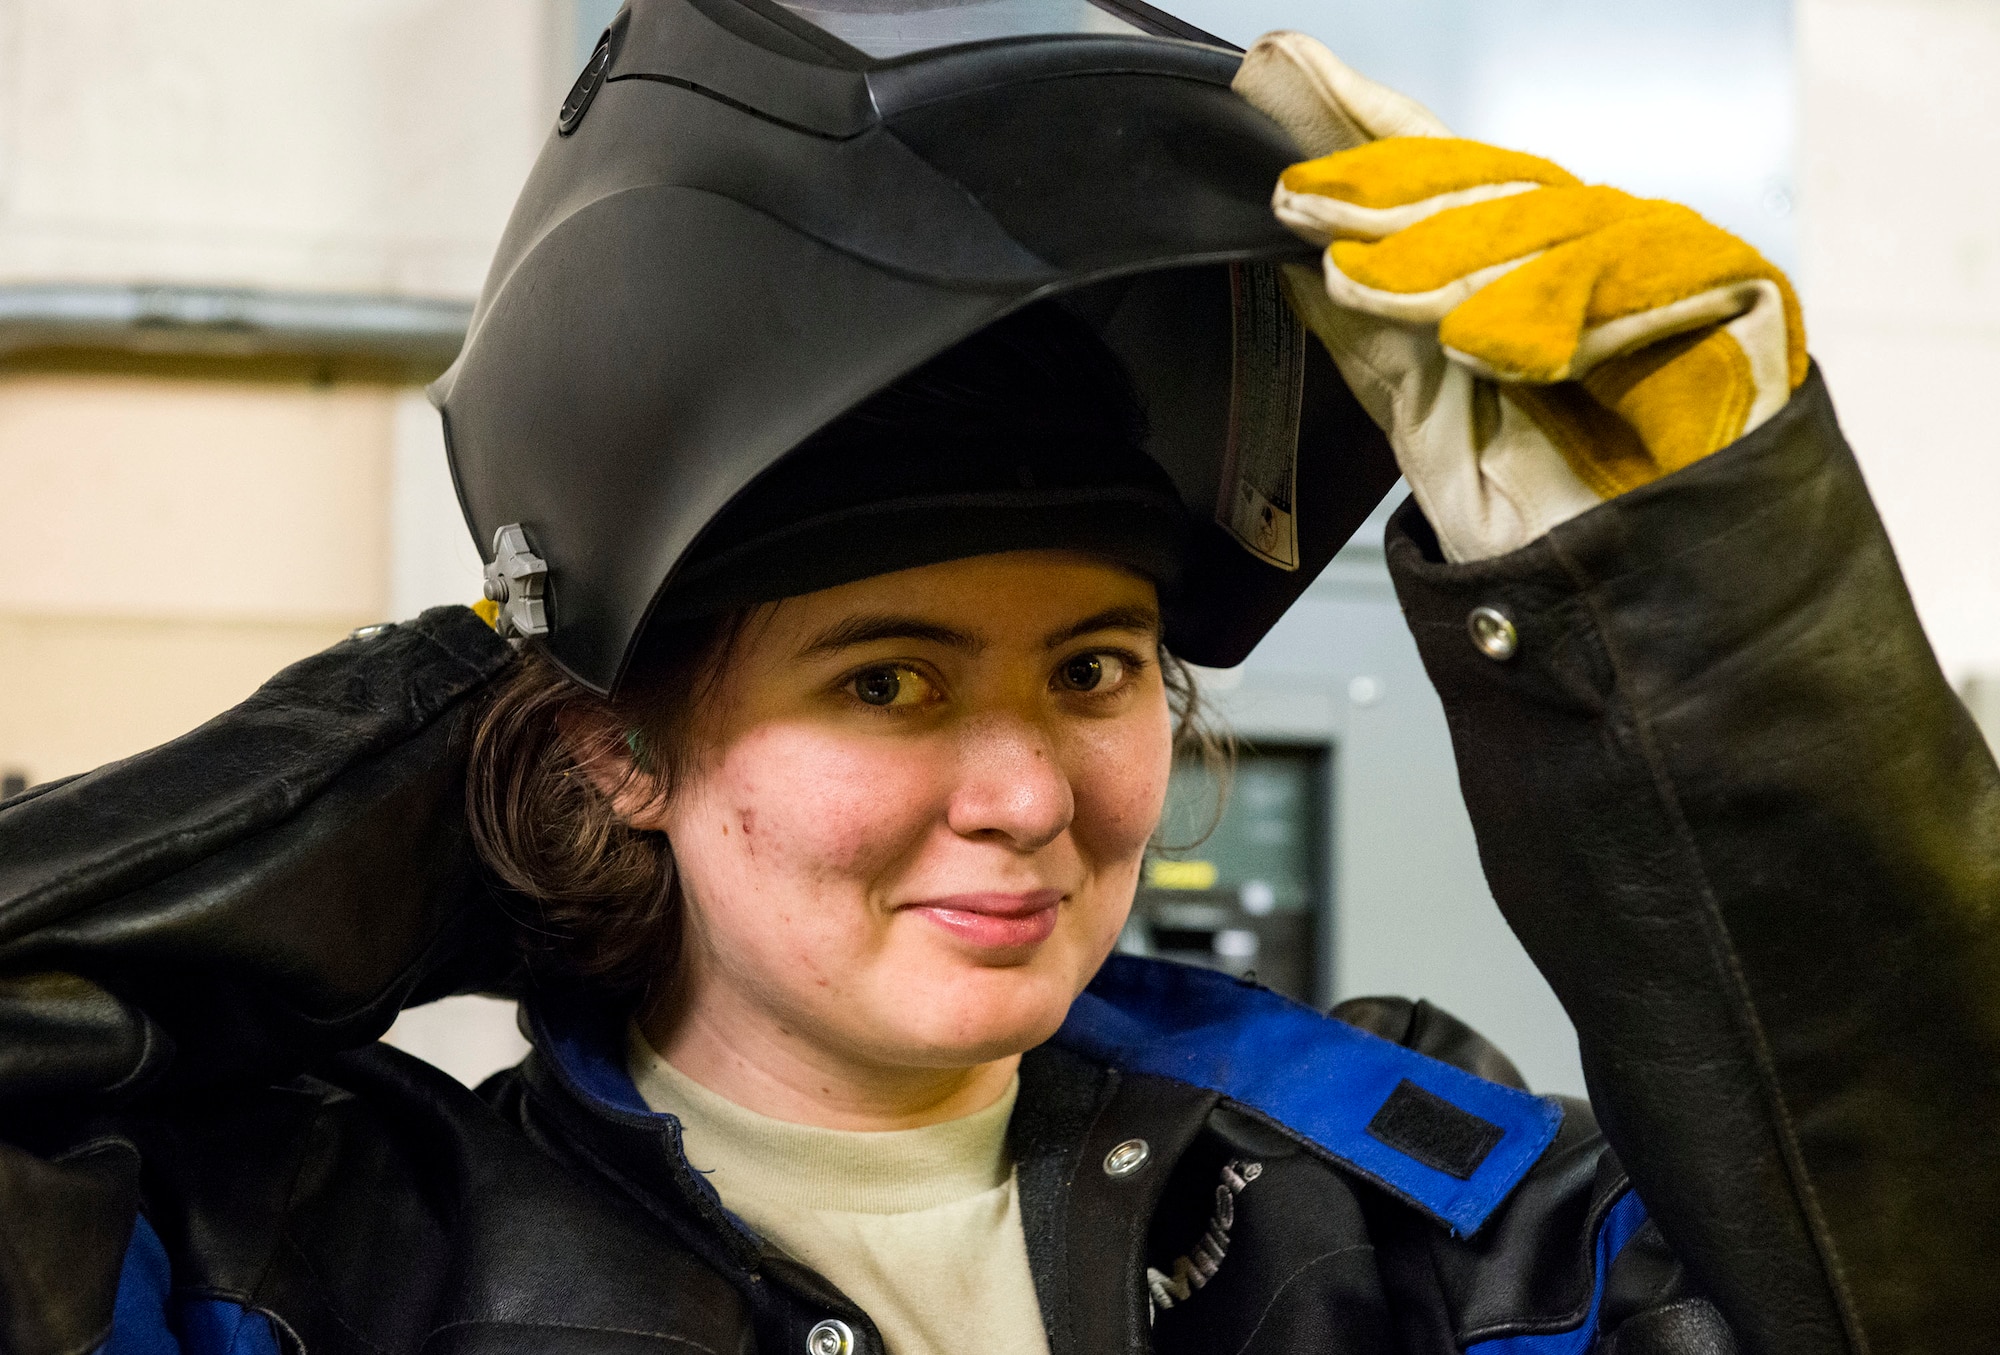 Airman 1st Class Heather Chambers, 23d Maintenance Squadron aircraft metals technology journeyman, poses for a photo, Dec. 19, 2017, at Moody Air Force Base, Ga. Metals technology technicians strive for perfection when fabricating and repairing Team Moody’s aircraft and equipment to ensure they maintain their continual high ops tempo. (U.S. Air Force photo by Airman 1st Class Erick Requadt)